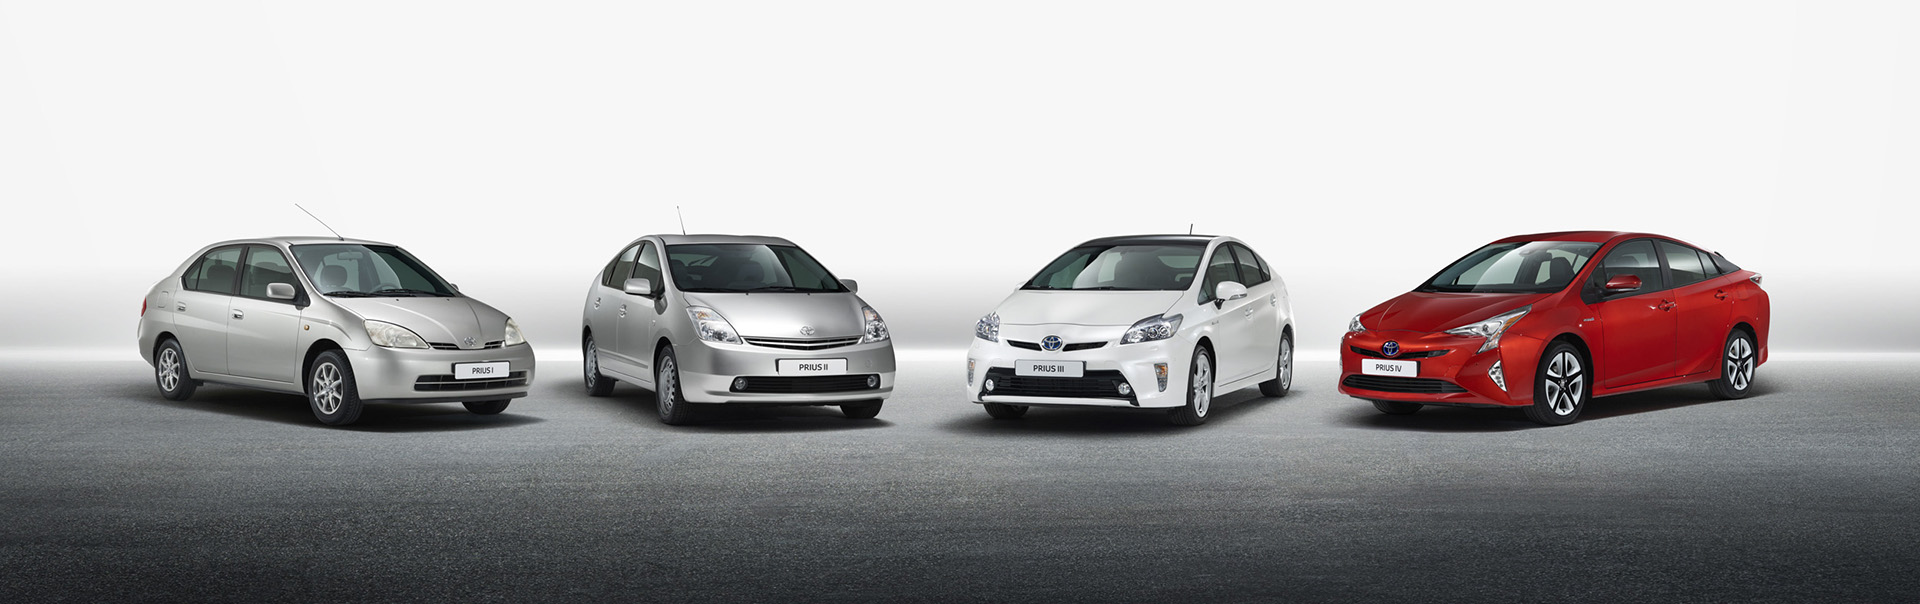 Different generations of the Prius